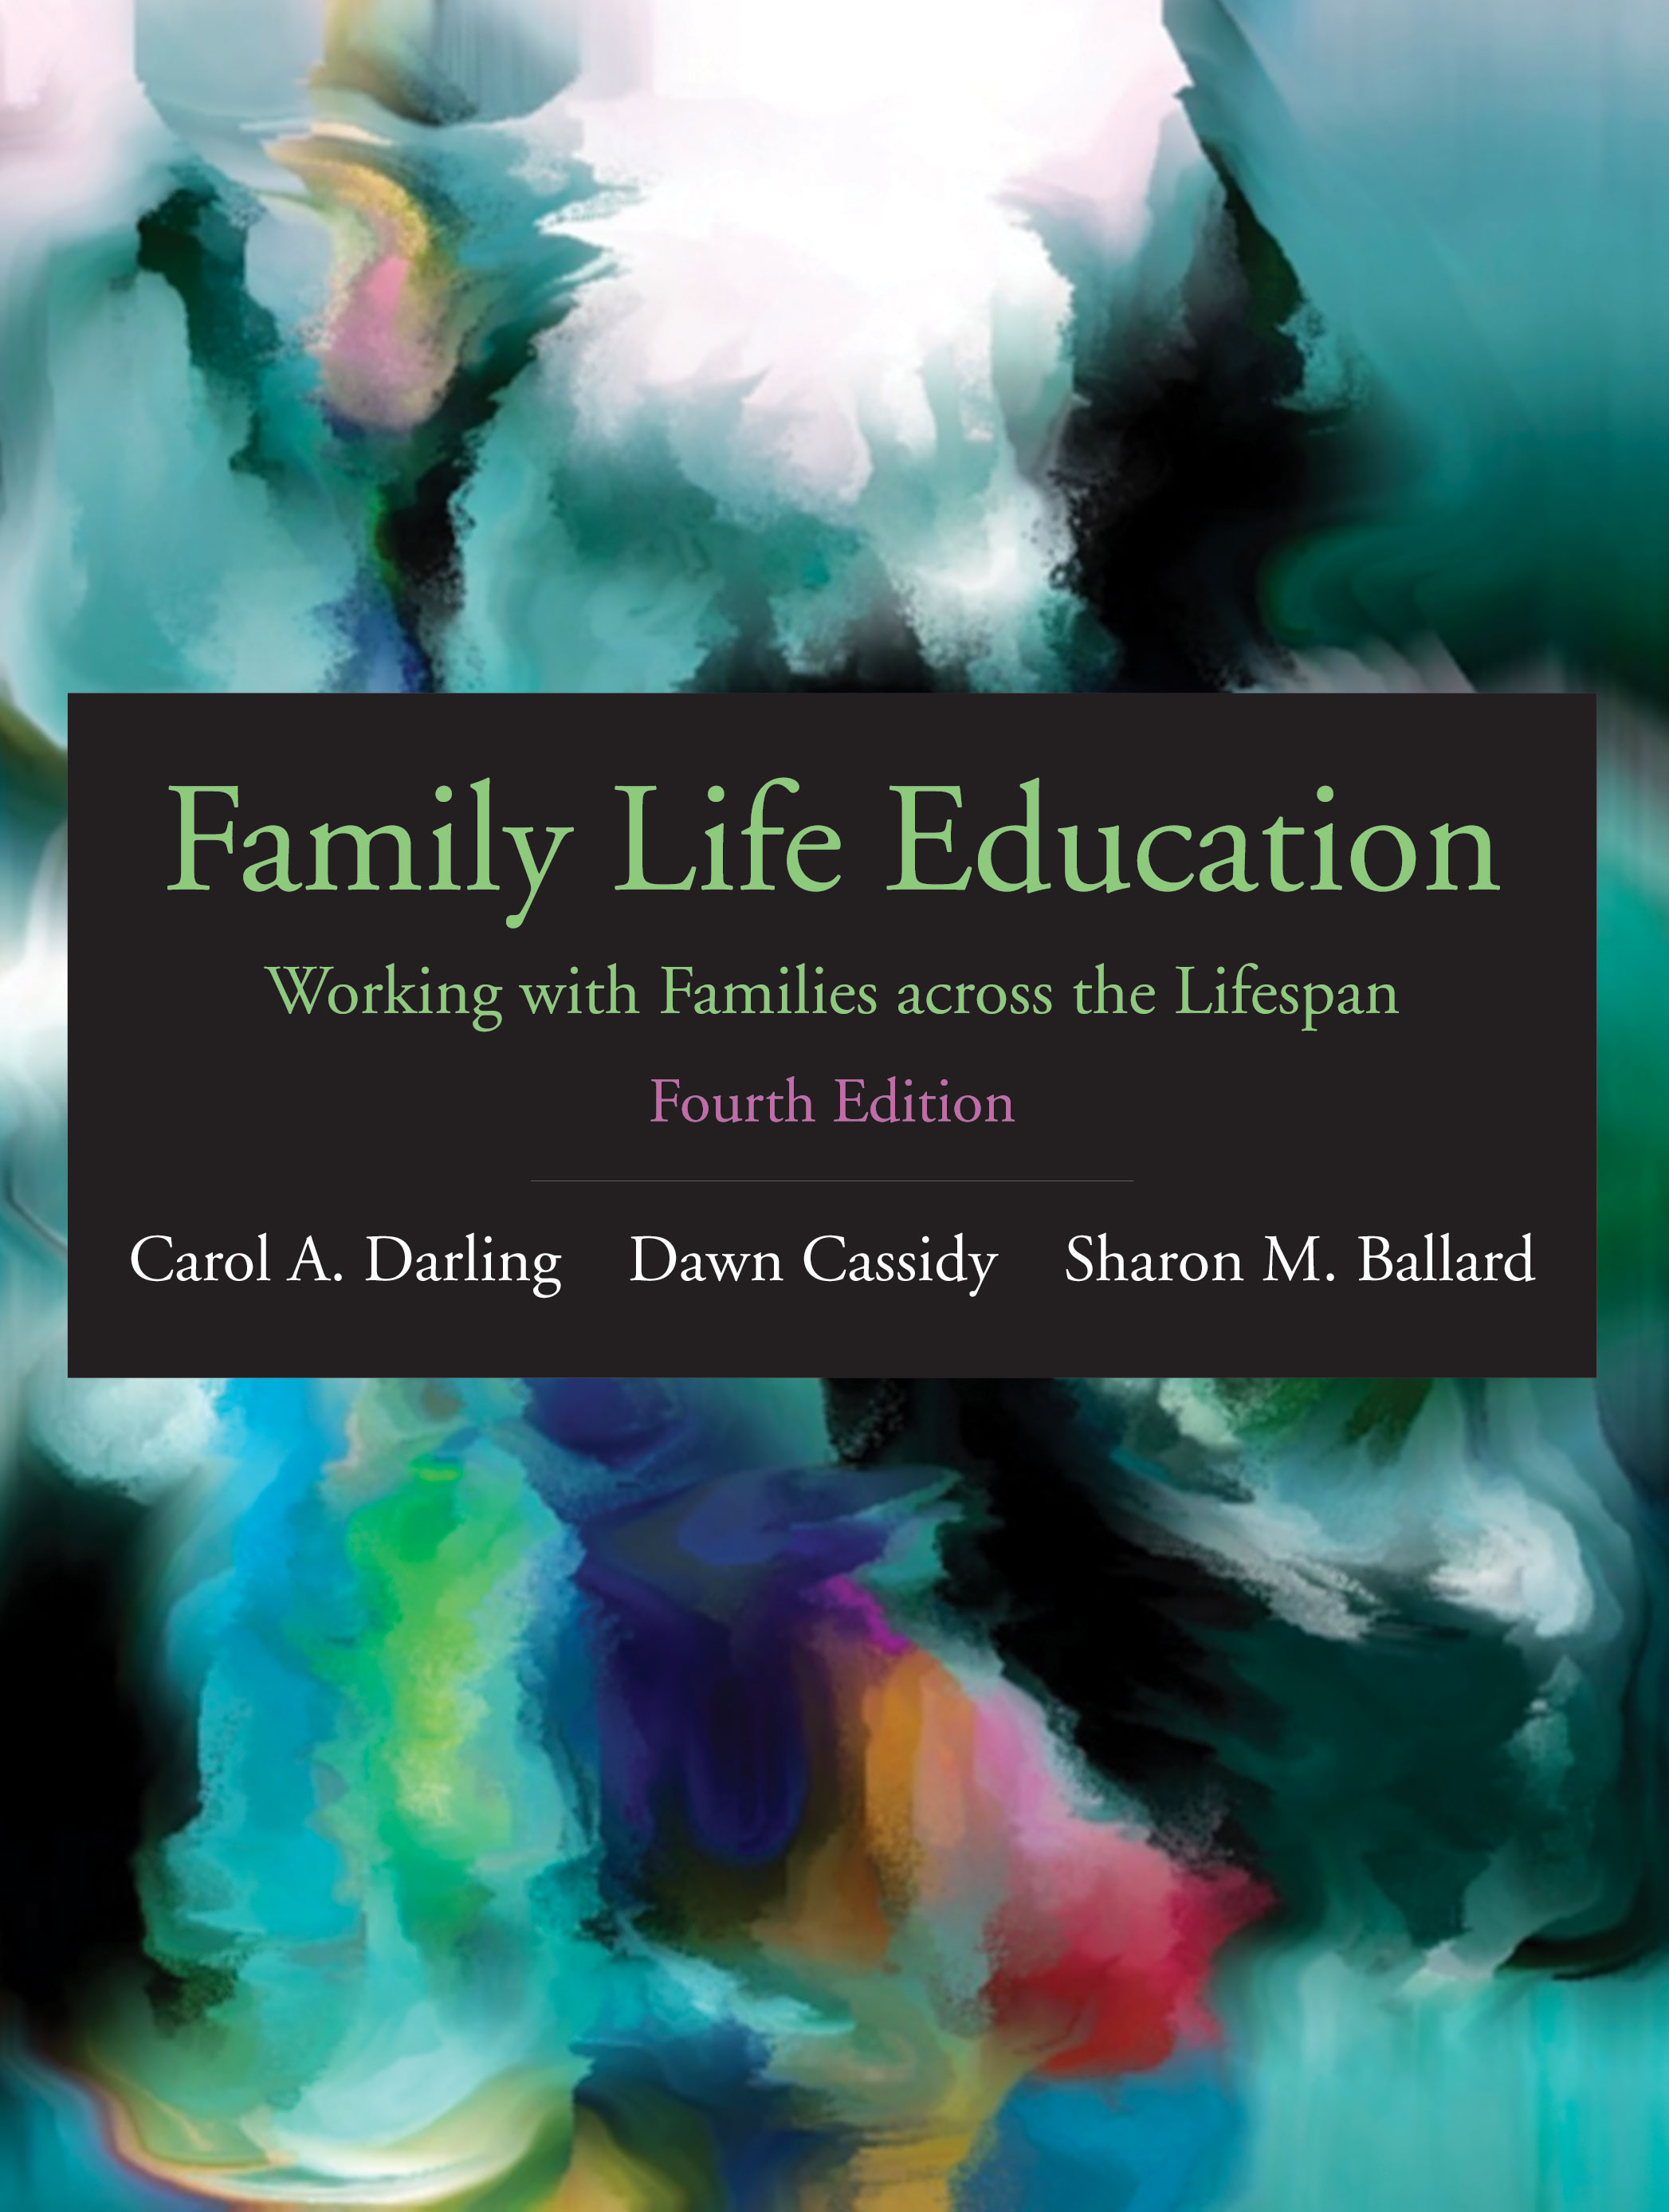 Family Life Education: Working with Families across the Lifespan by Carol A. Darling, Dawn  Cassidy, Sharon M. Ballard